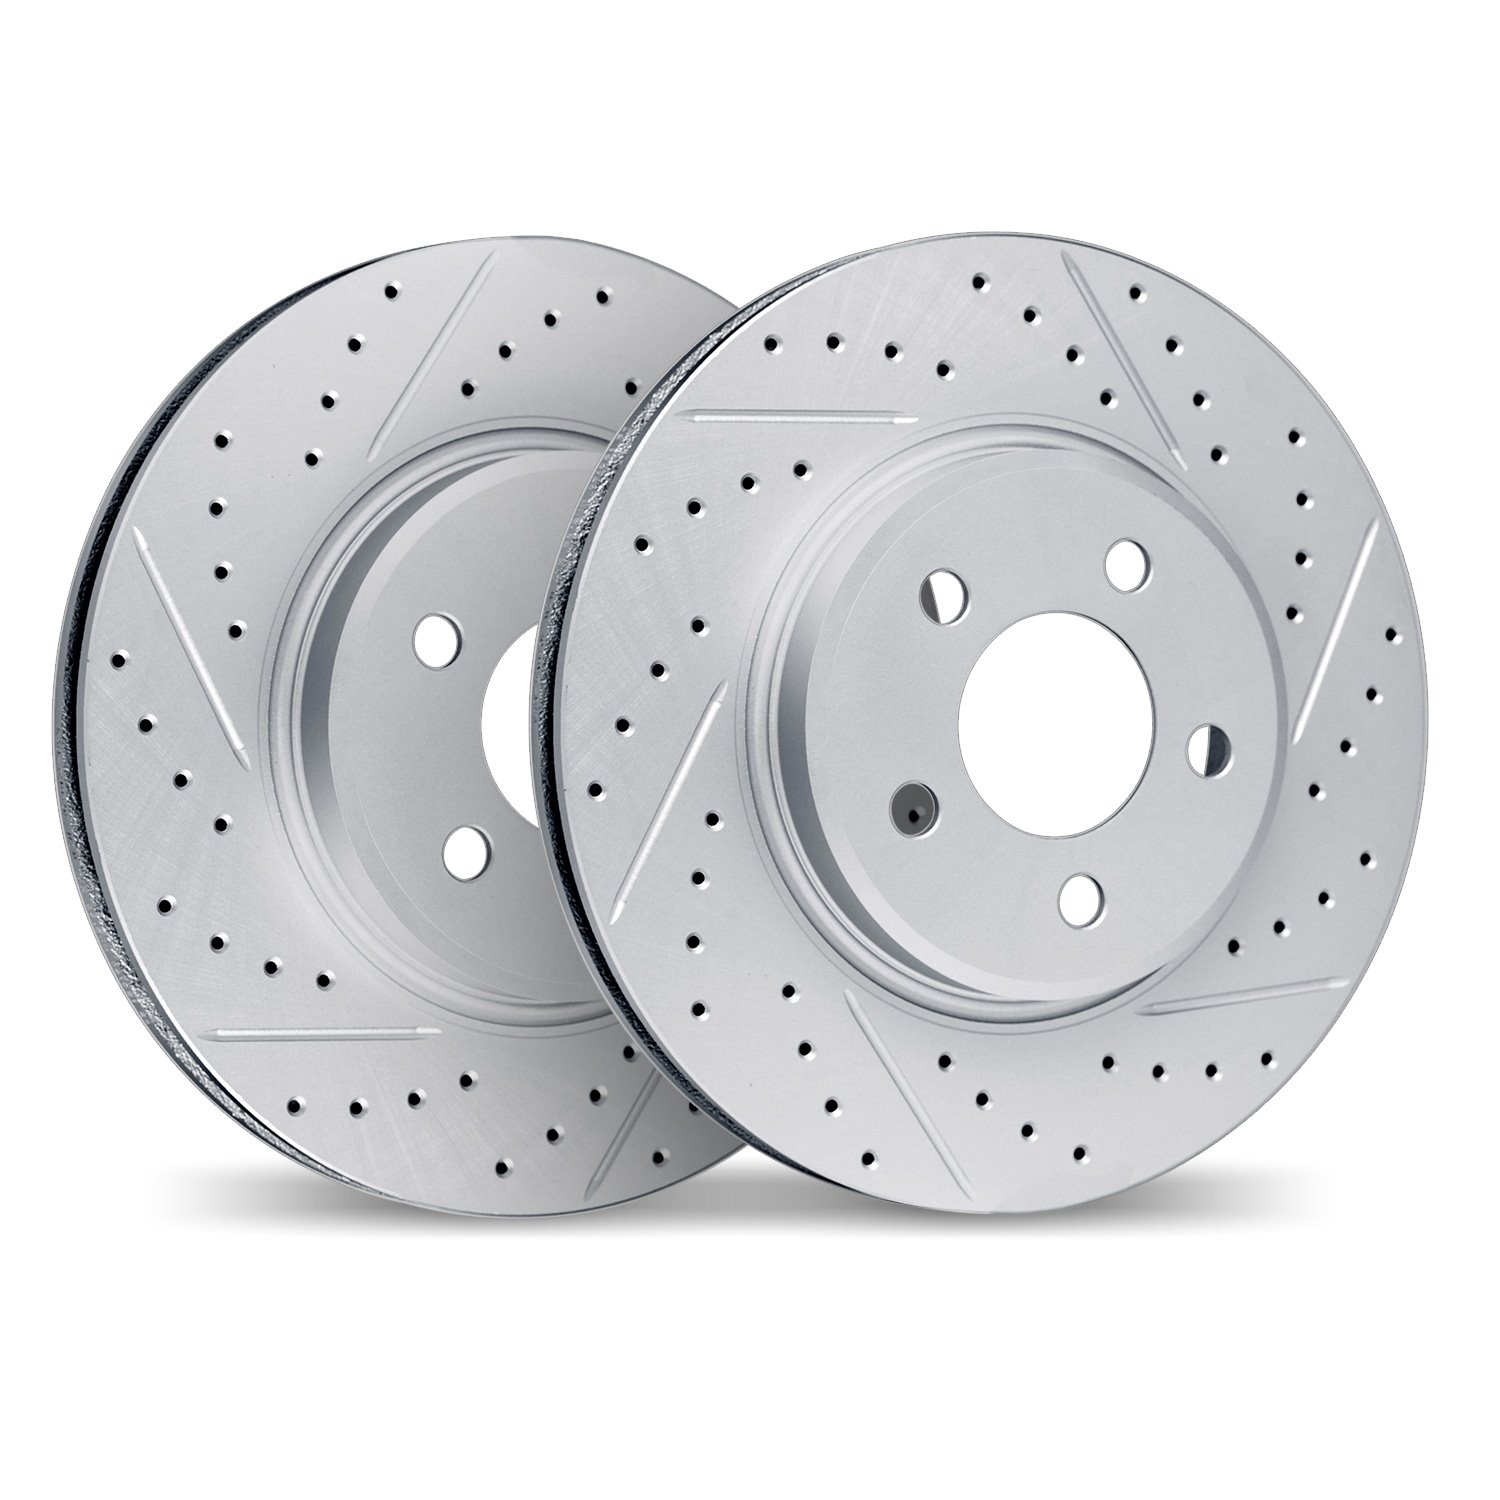 2002-75026 Geoperformance Drilled/Slotted Brake Rotors, Fits Select Lexus/Toyota/Scion, Position: Rear